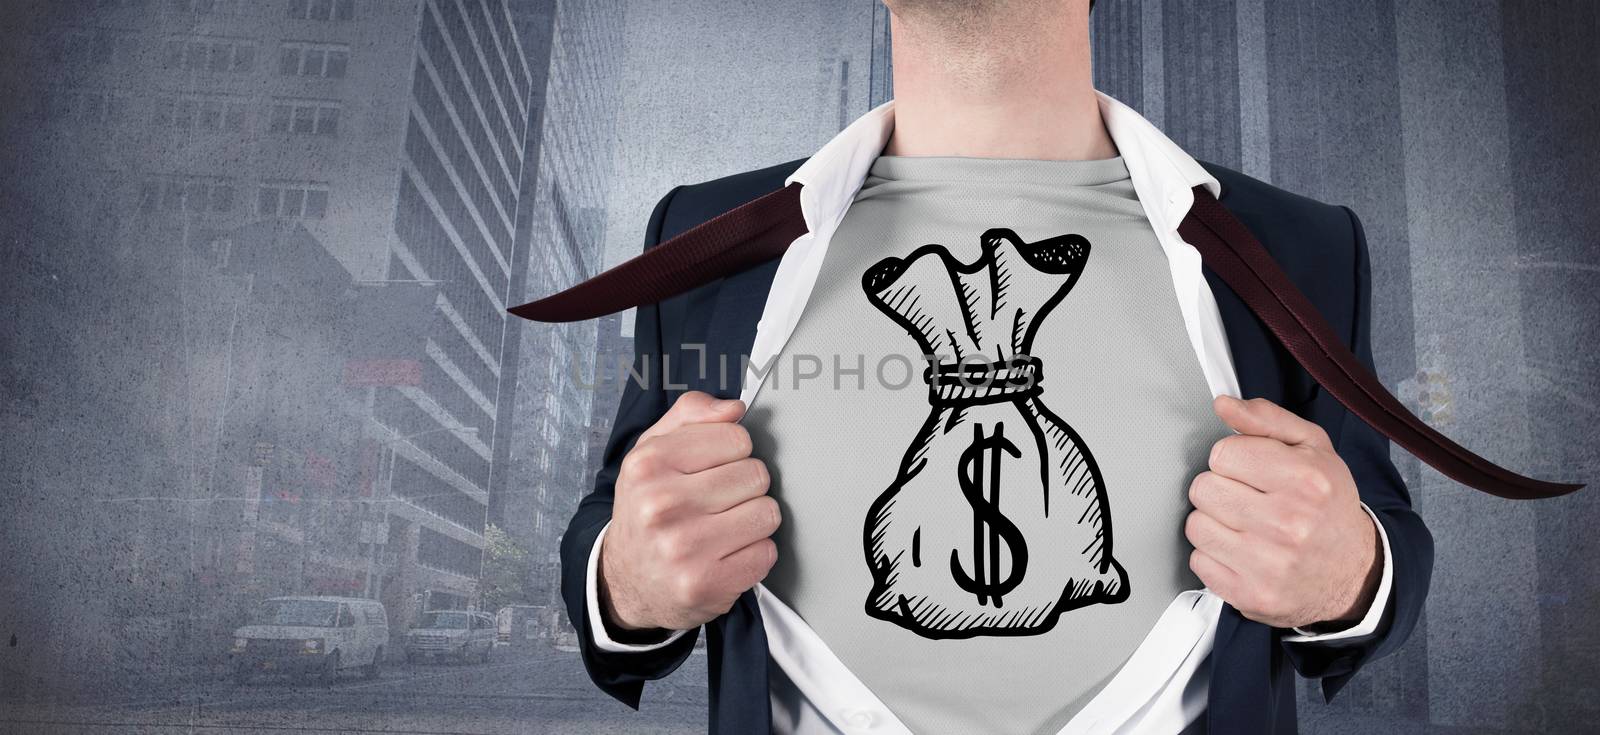 Businessman opening shirt in superhero style against urban projection